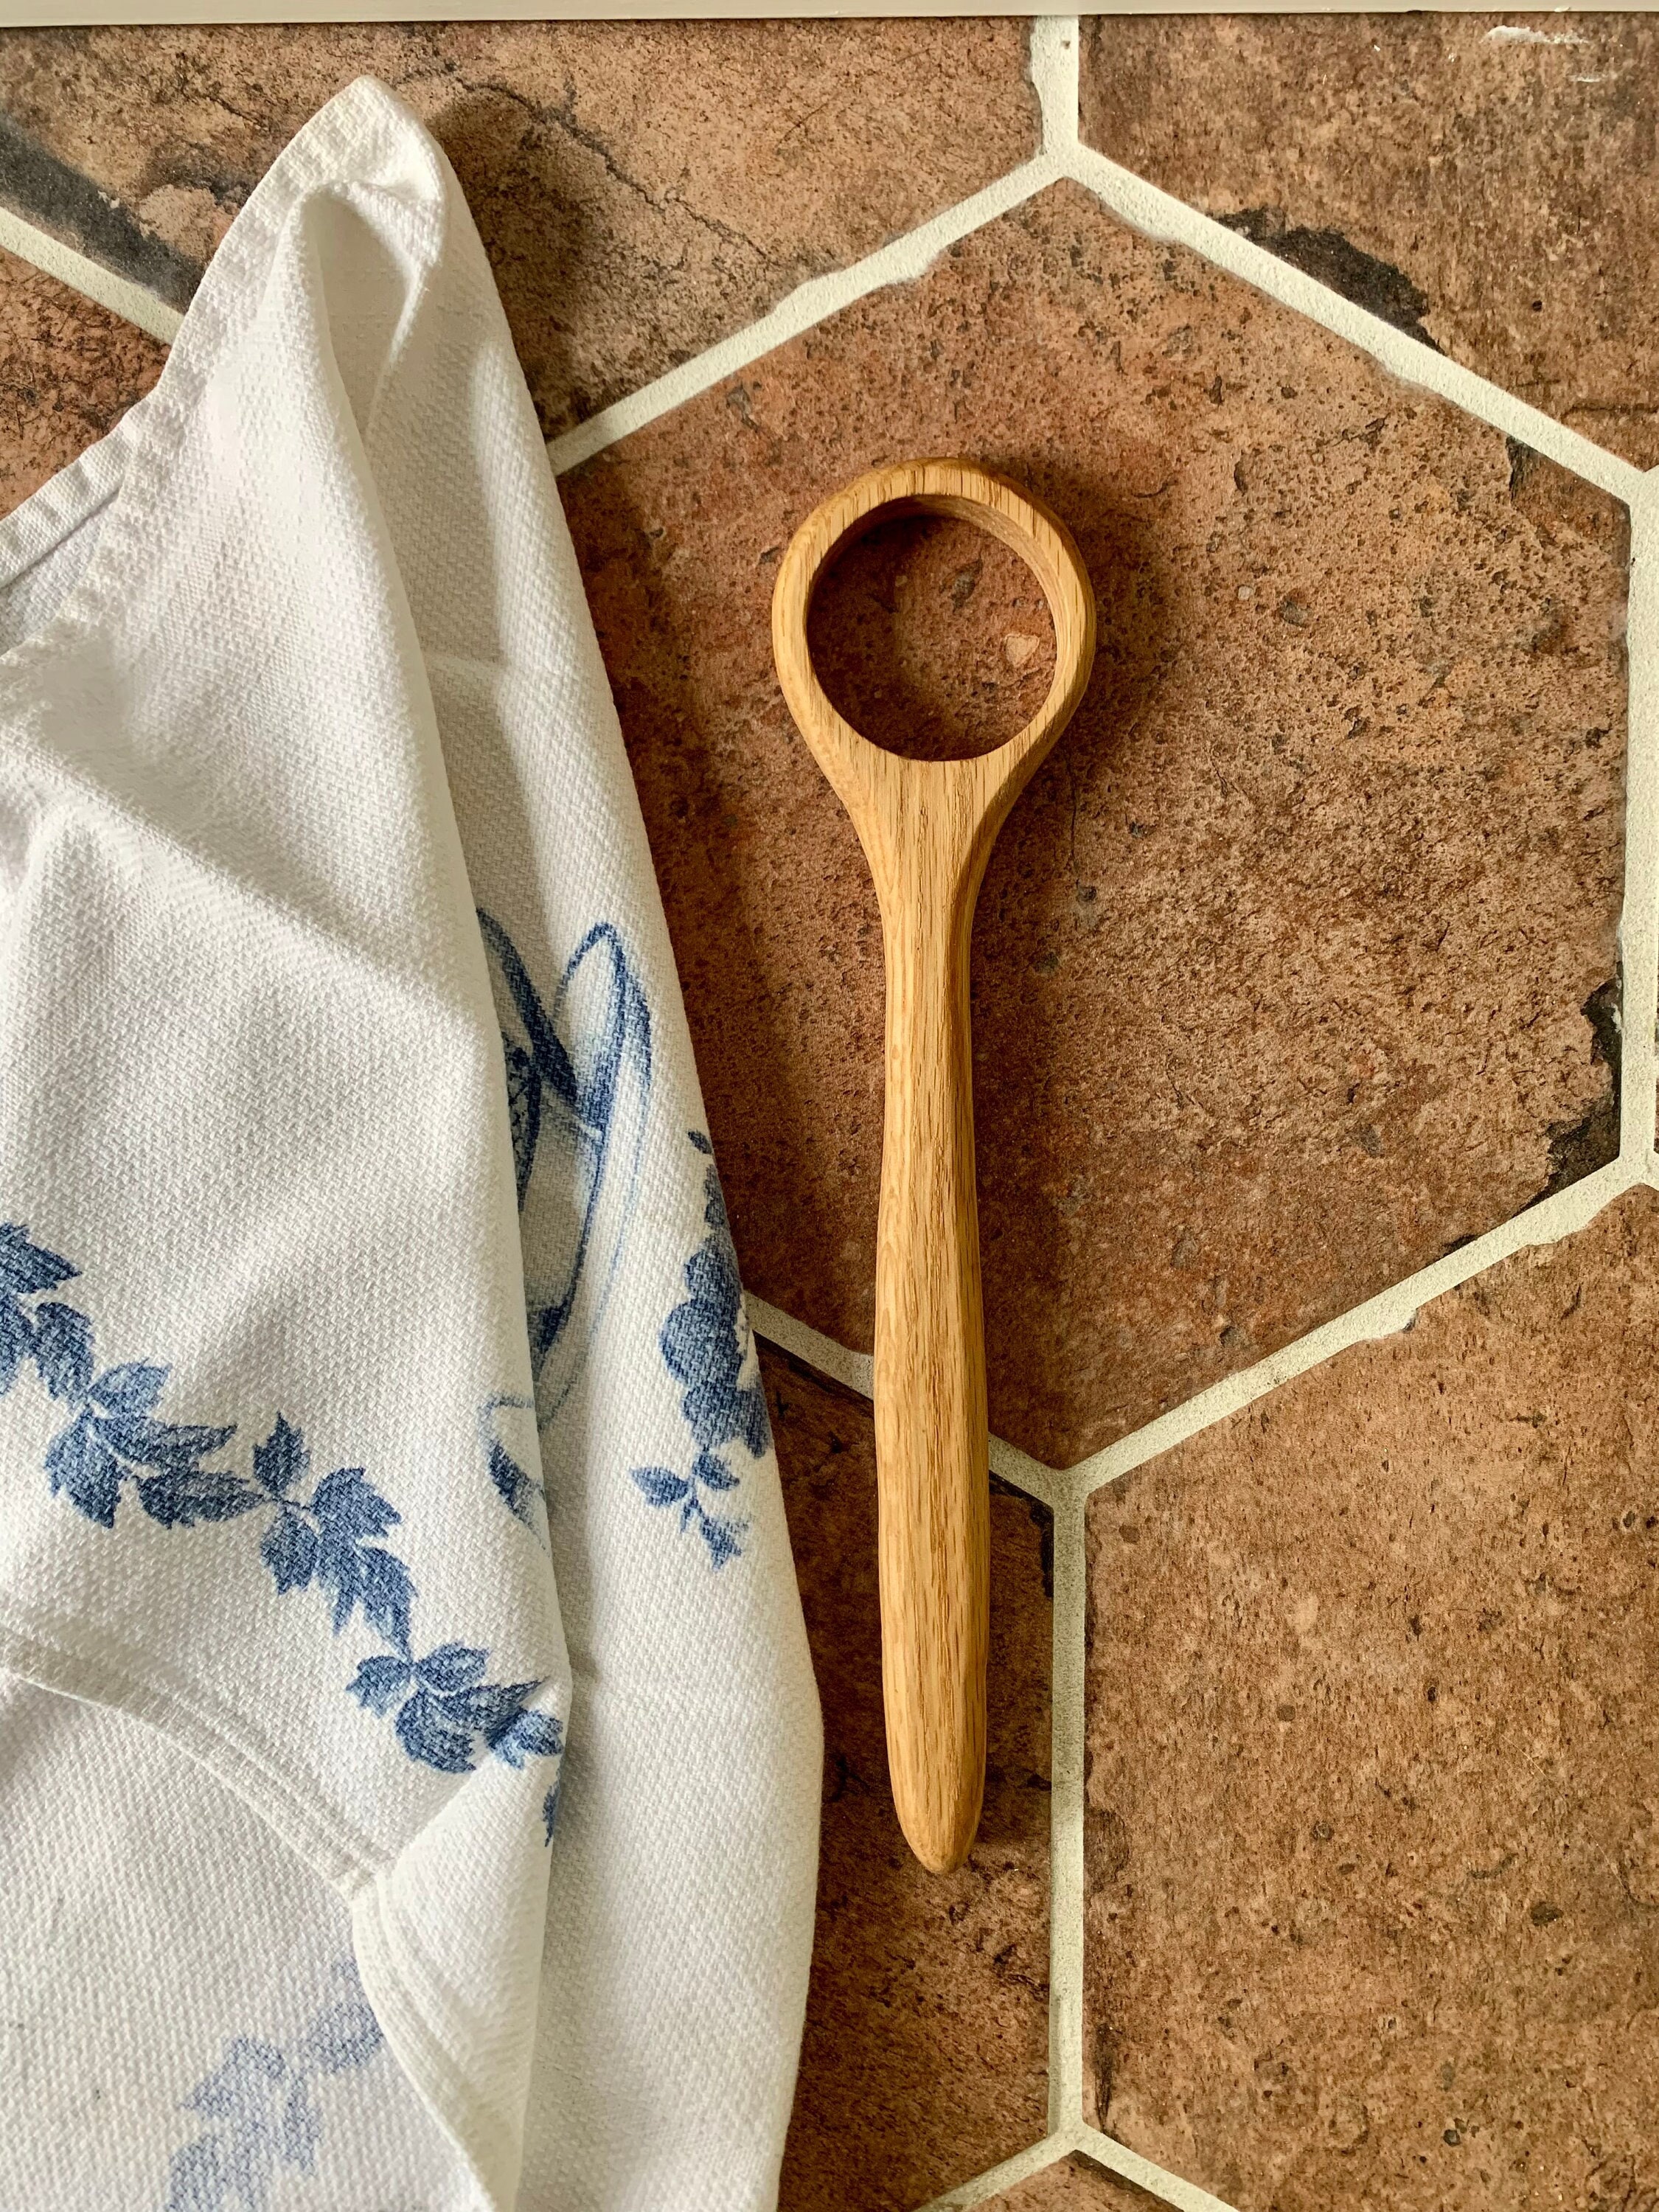 Buy Hand Crafted Wood Burned Danish Dough Whisk And Stoneware Spoon Rest  Set, made to order from CROWN STUDIO